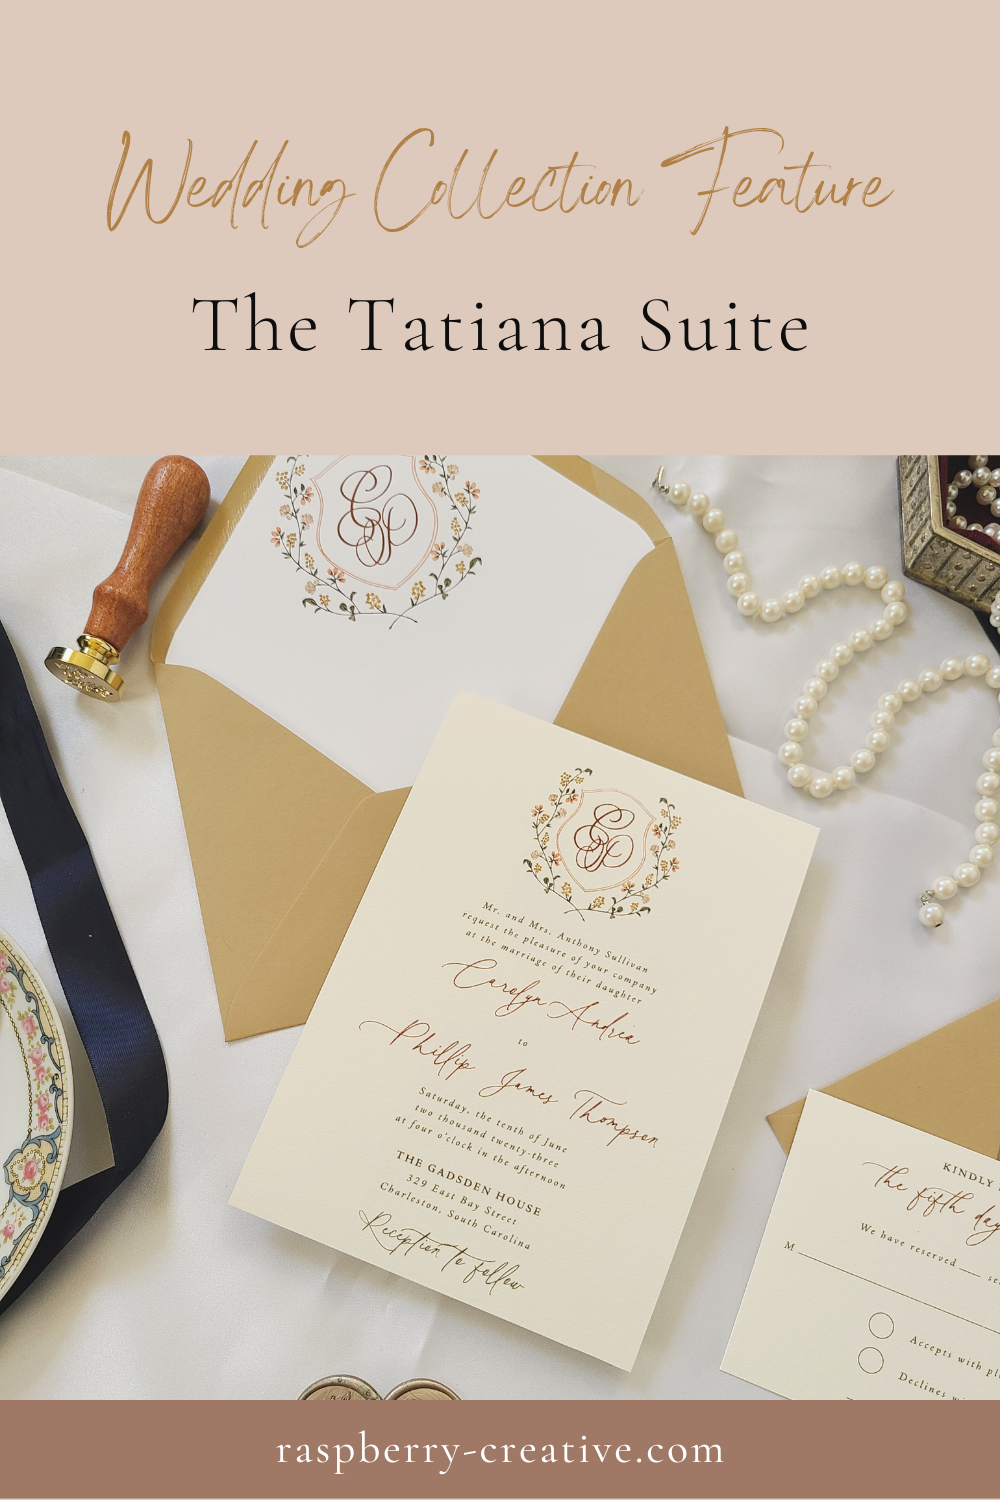 wedding collection feature the tatiana suite